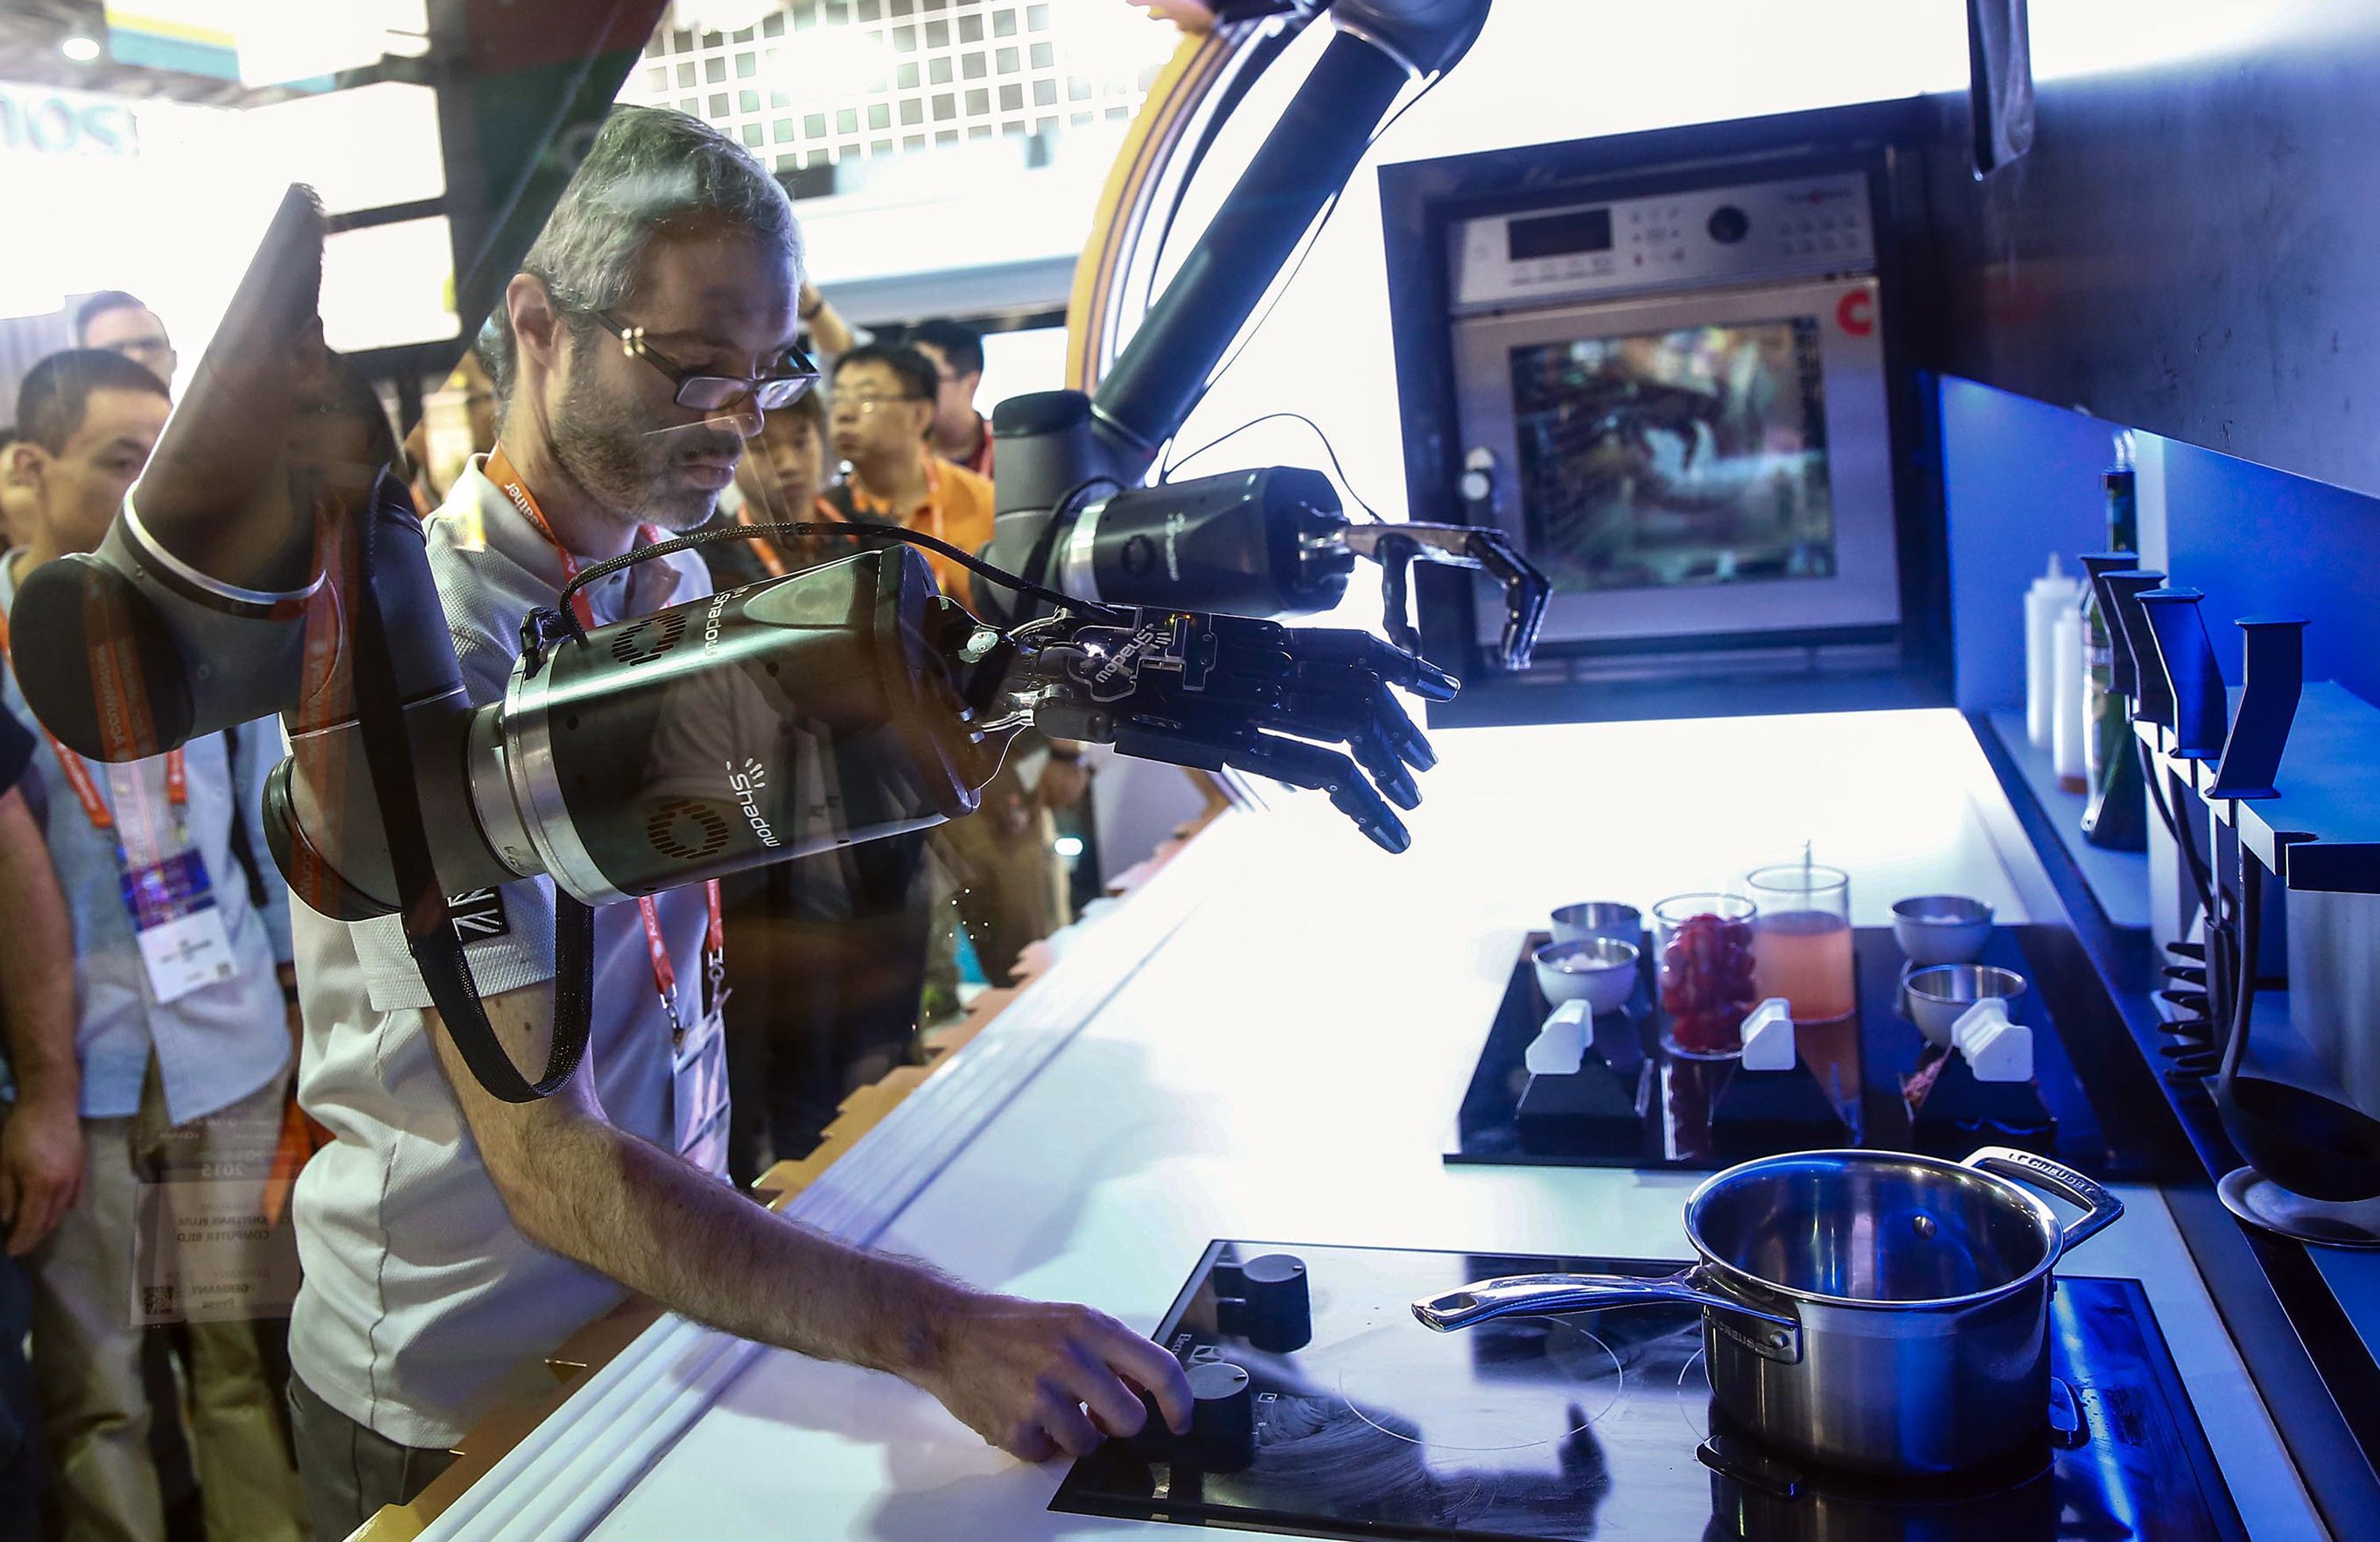 An exhibitor demonstrates a robot to visitors during the first Consumer Electronics Show (CES) in Asia in Shanghai on May 25. China is focusing more on domestic consumption, high technology and innovation as it looks to wean itself off exports and state-led investment growth. Photo: AFP